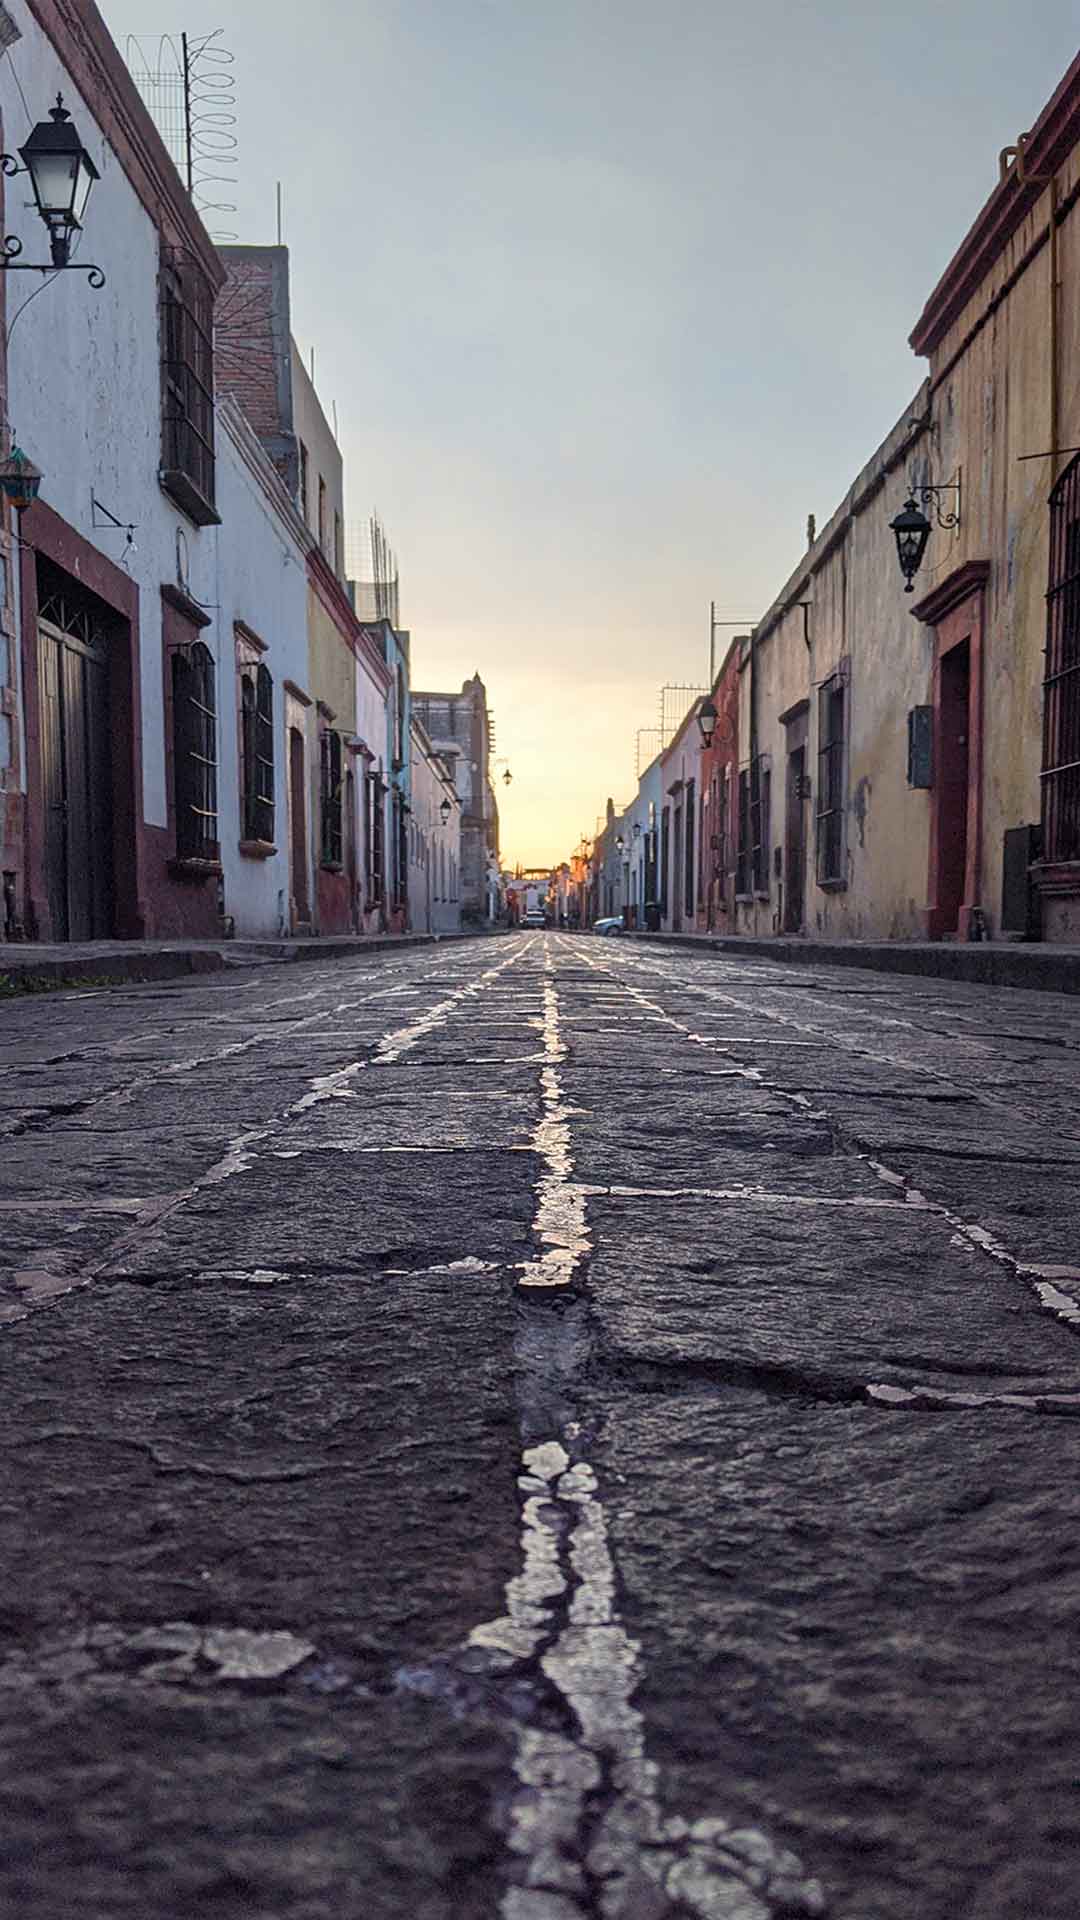 Queretaro Mexico Best Restaurant Review Streetscape at Sunset